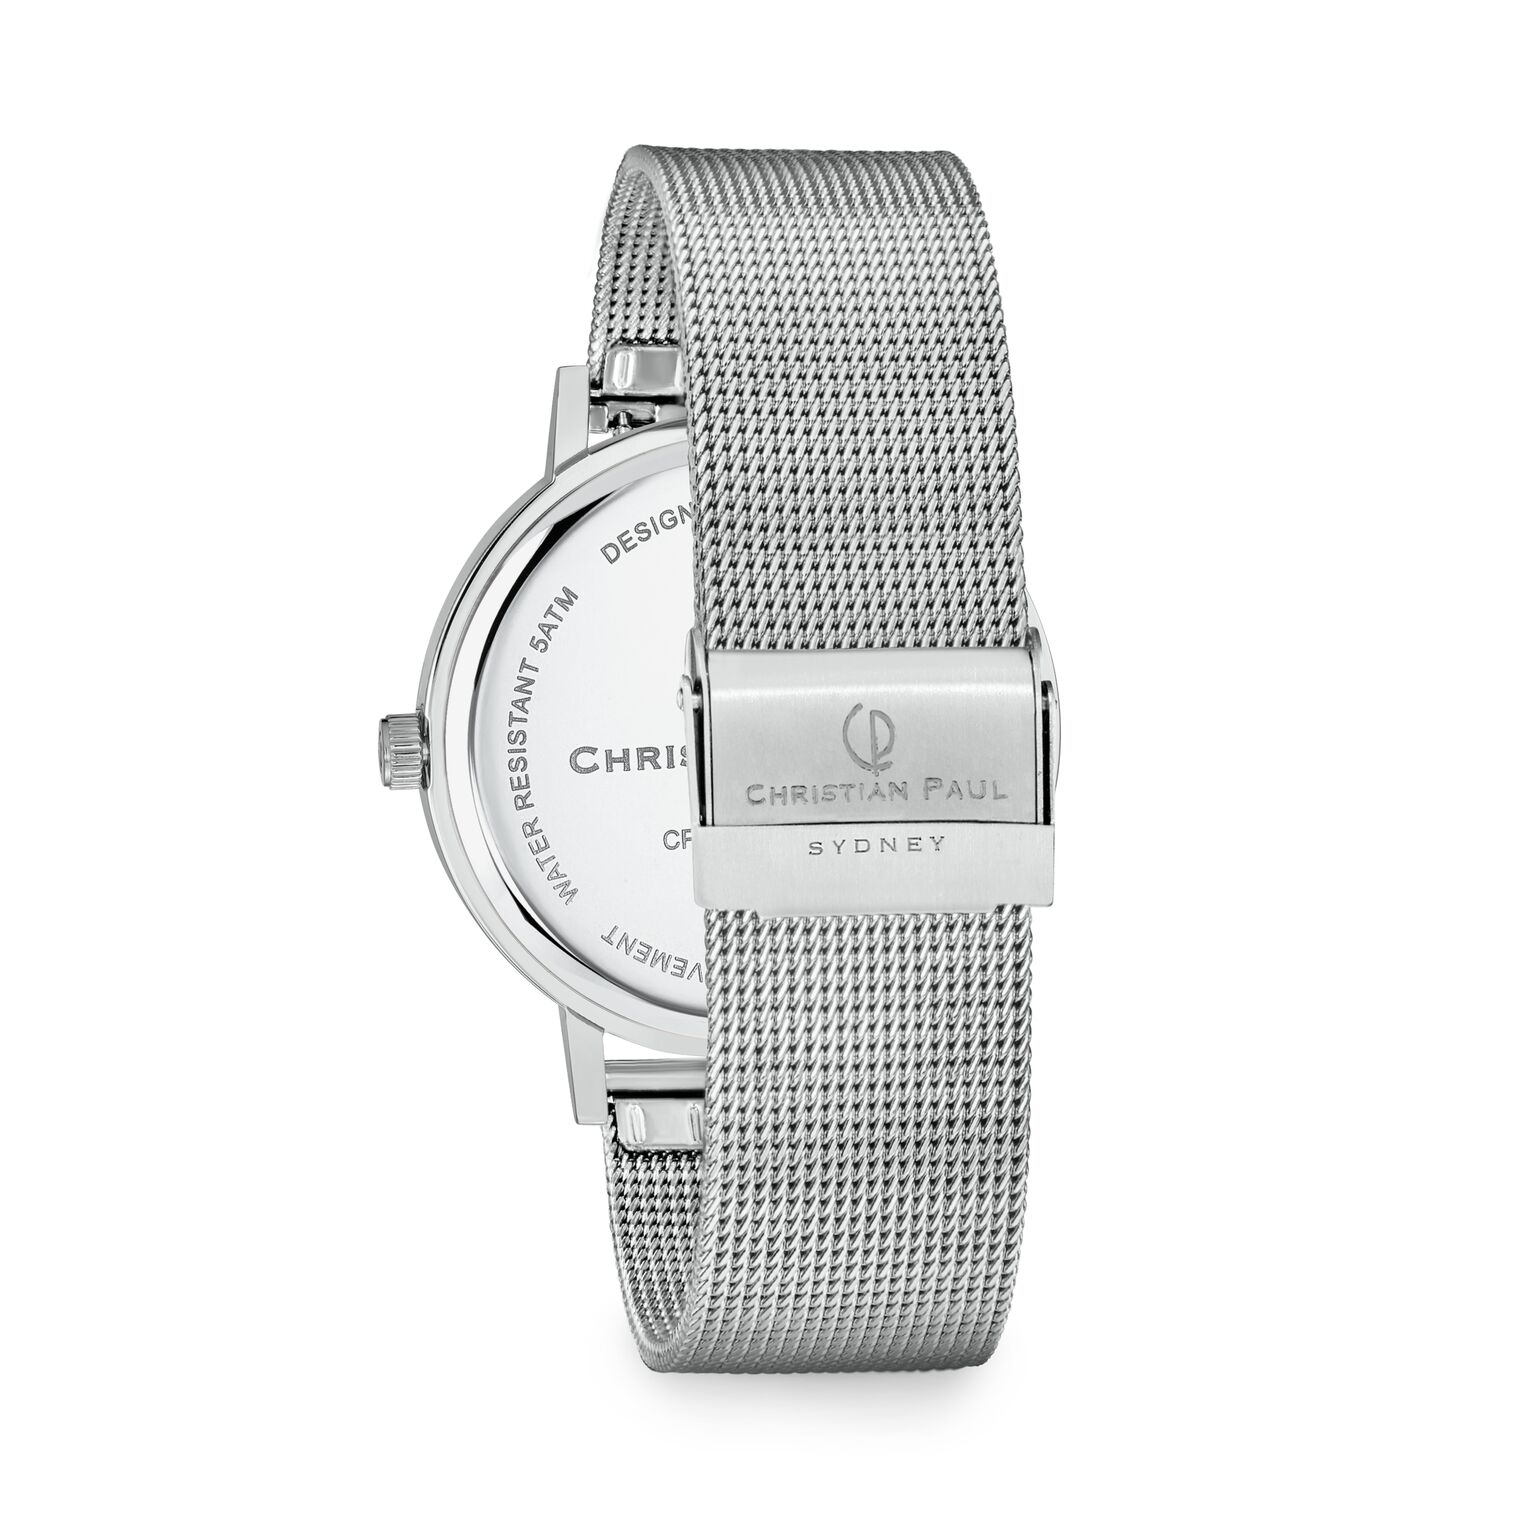 Luxury silver mesh watch with crystals